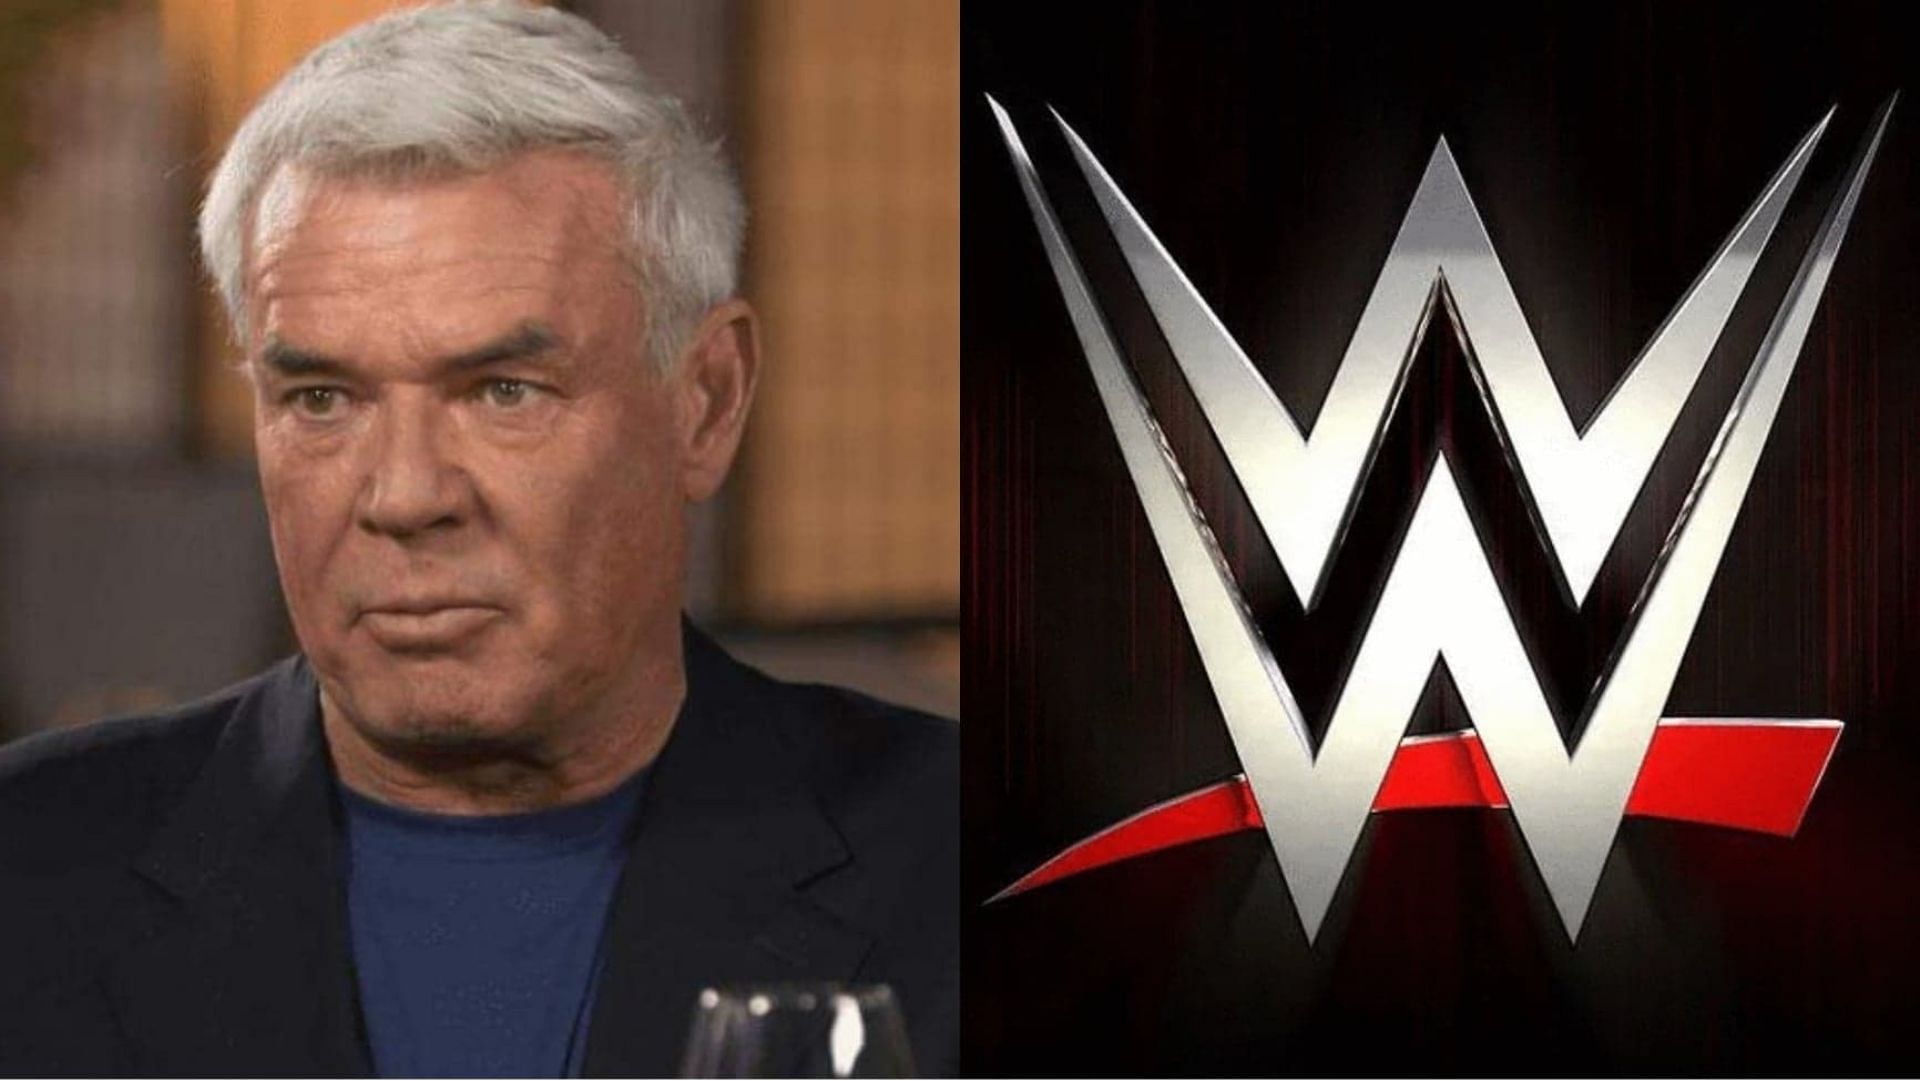 Eric Bischoff was the executive director of SmackDown in 2019